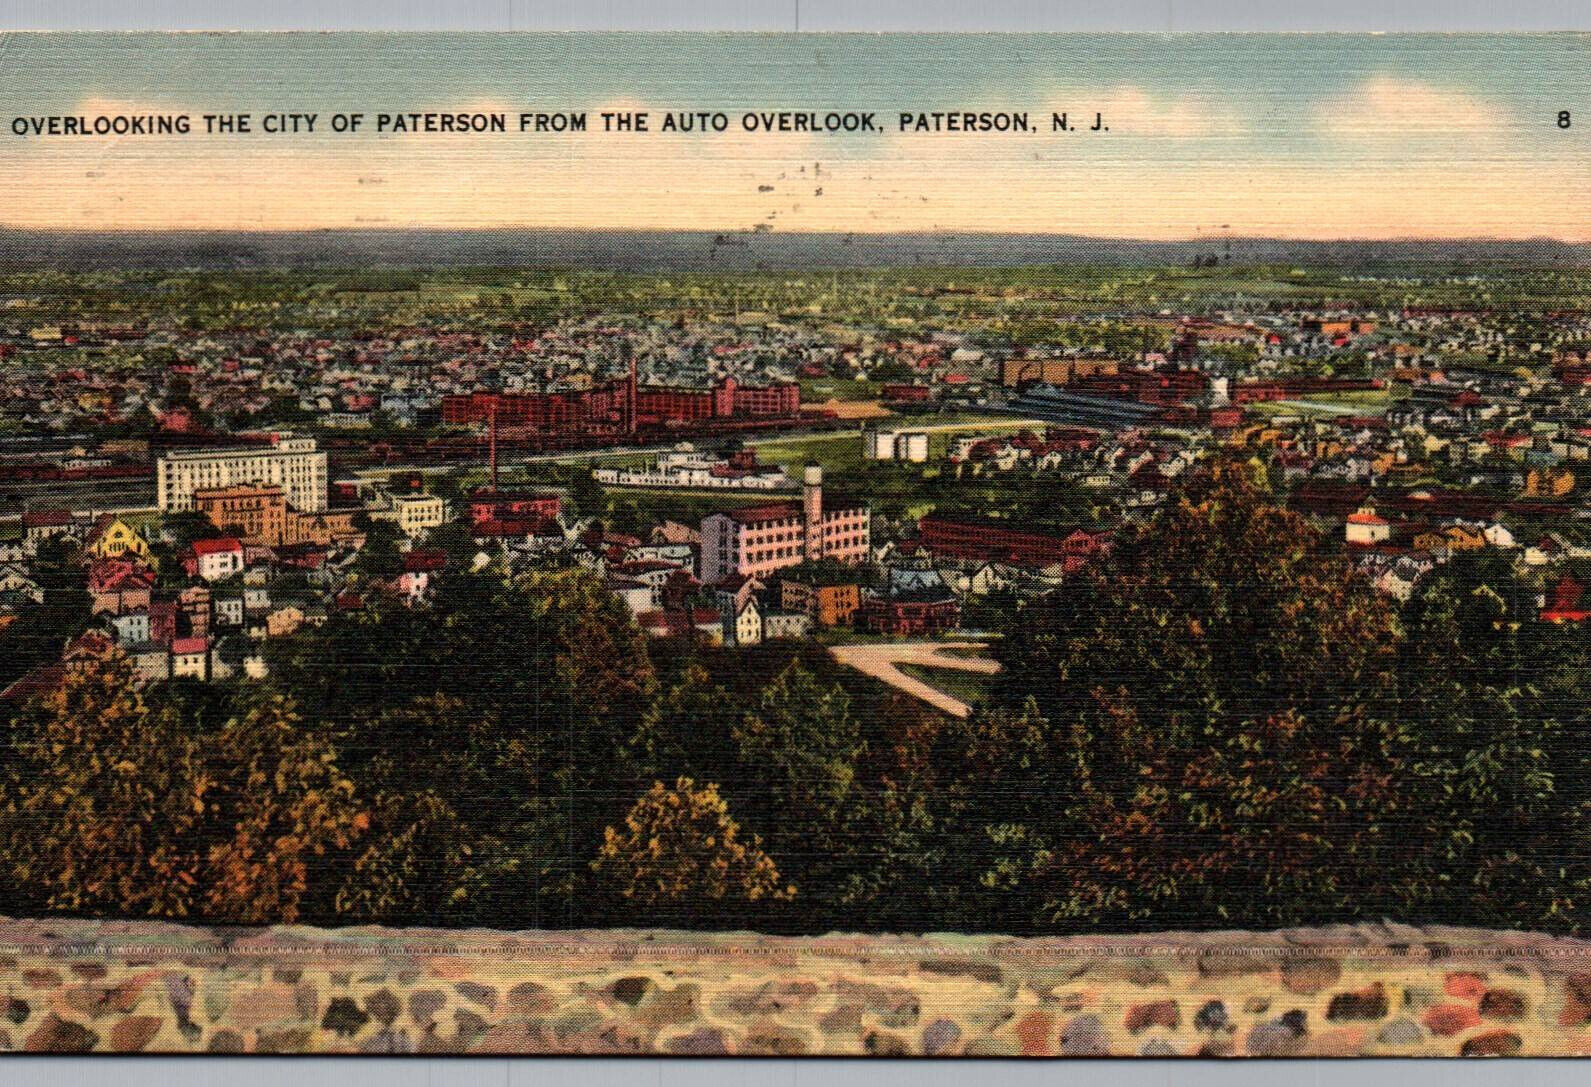 Paterson NJ Postcard Overlooking the City from Auto Overlook Birdseye View Old